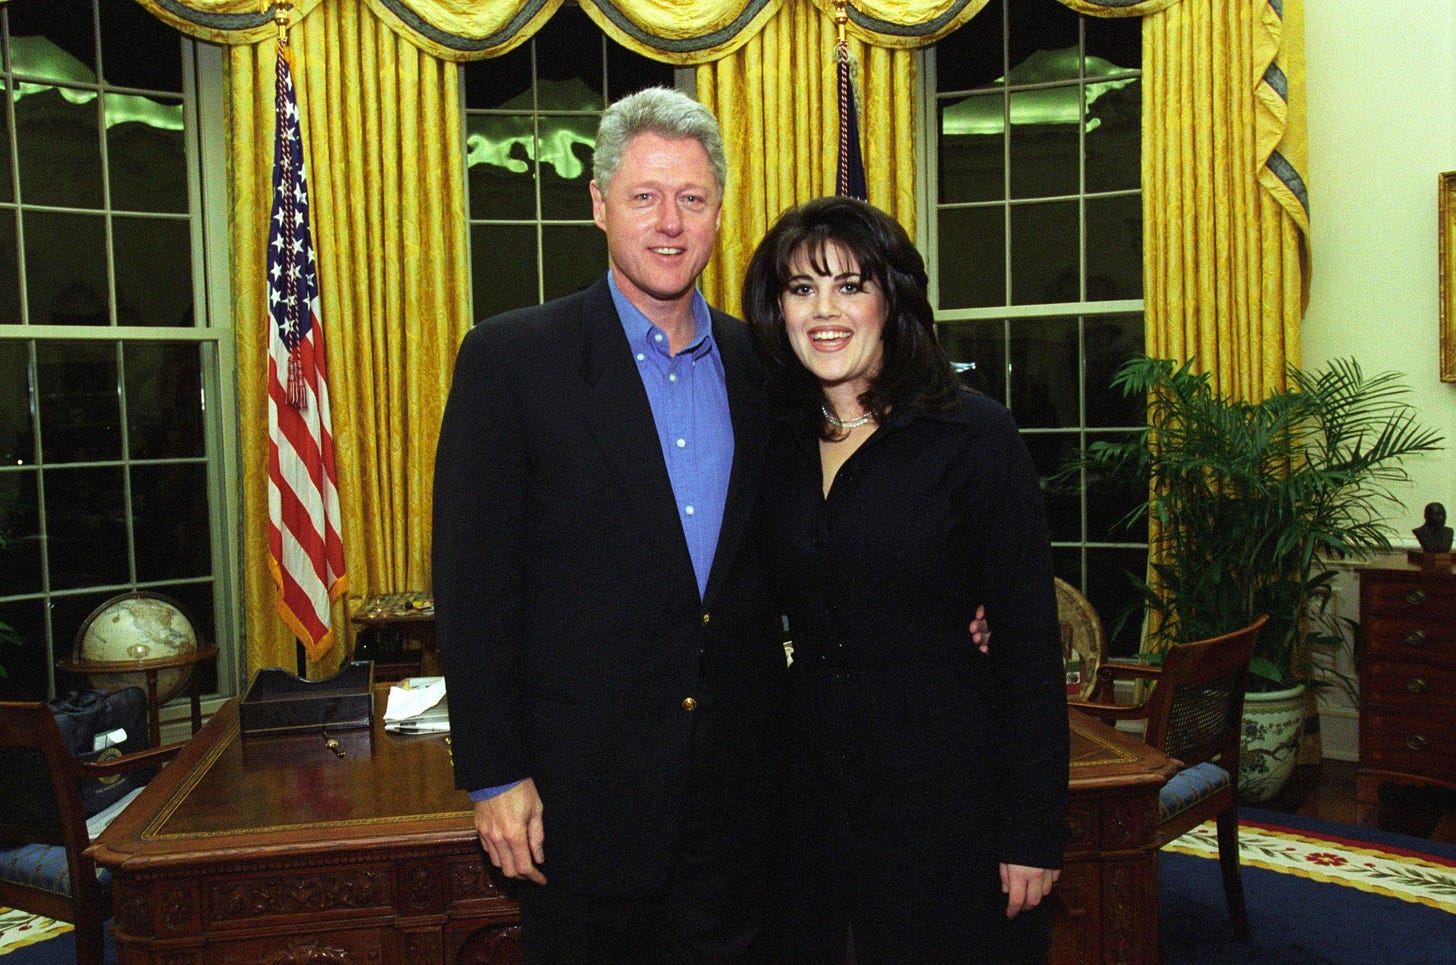 Clinton with his mistress from the '90s.